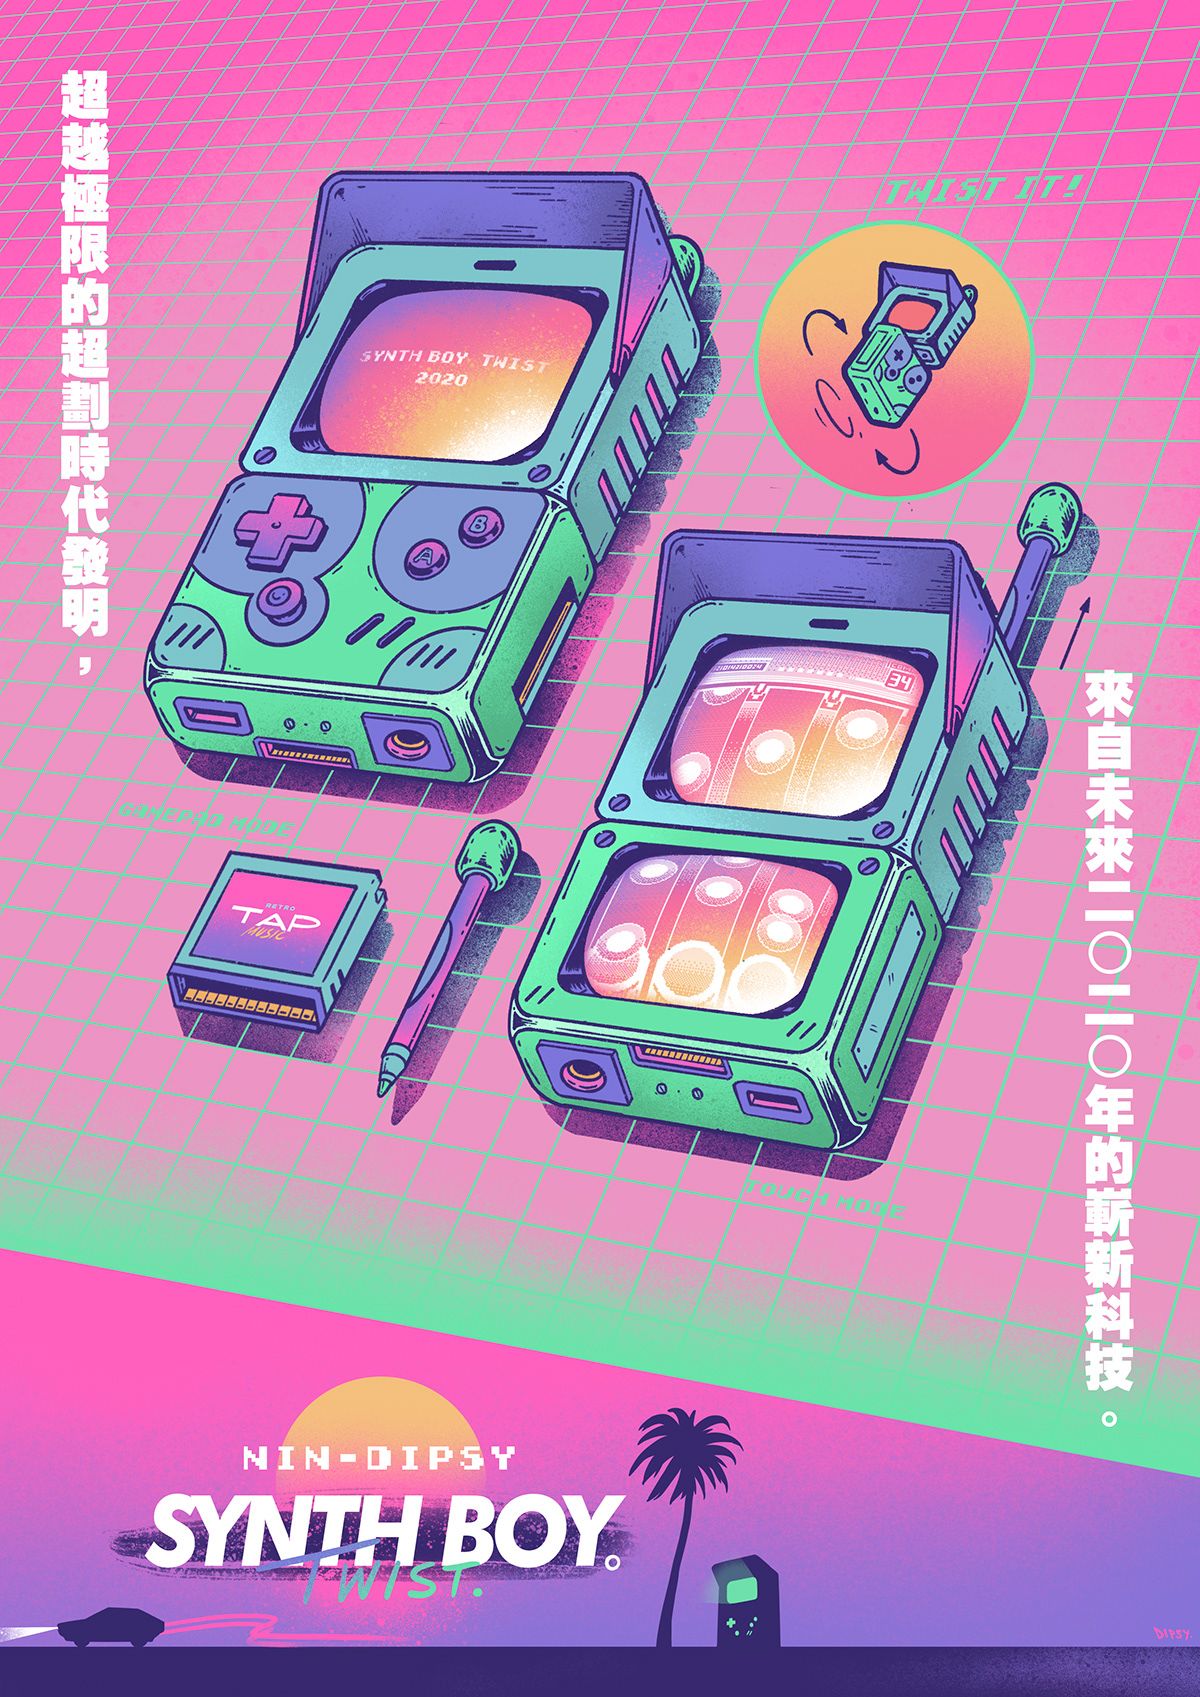 A Synth Boy illustration in a pink and purple gradient. - Game Boy